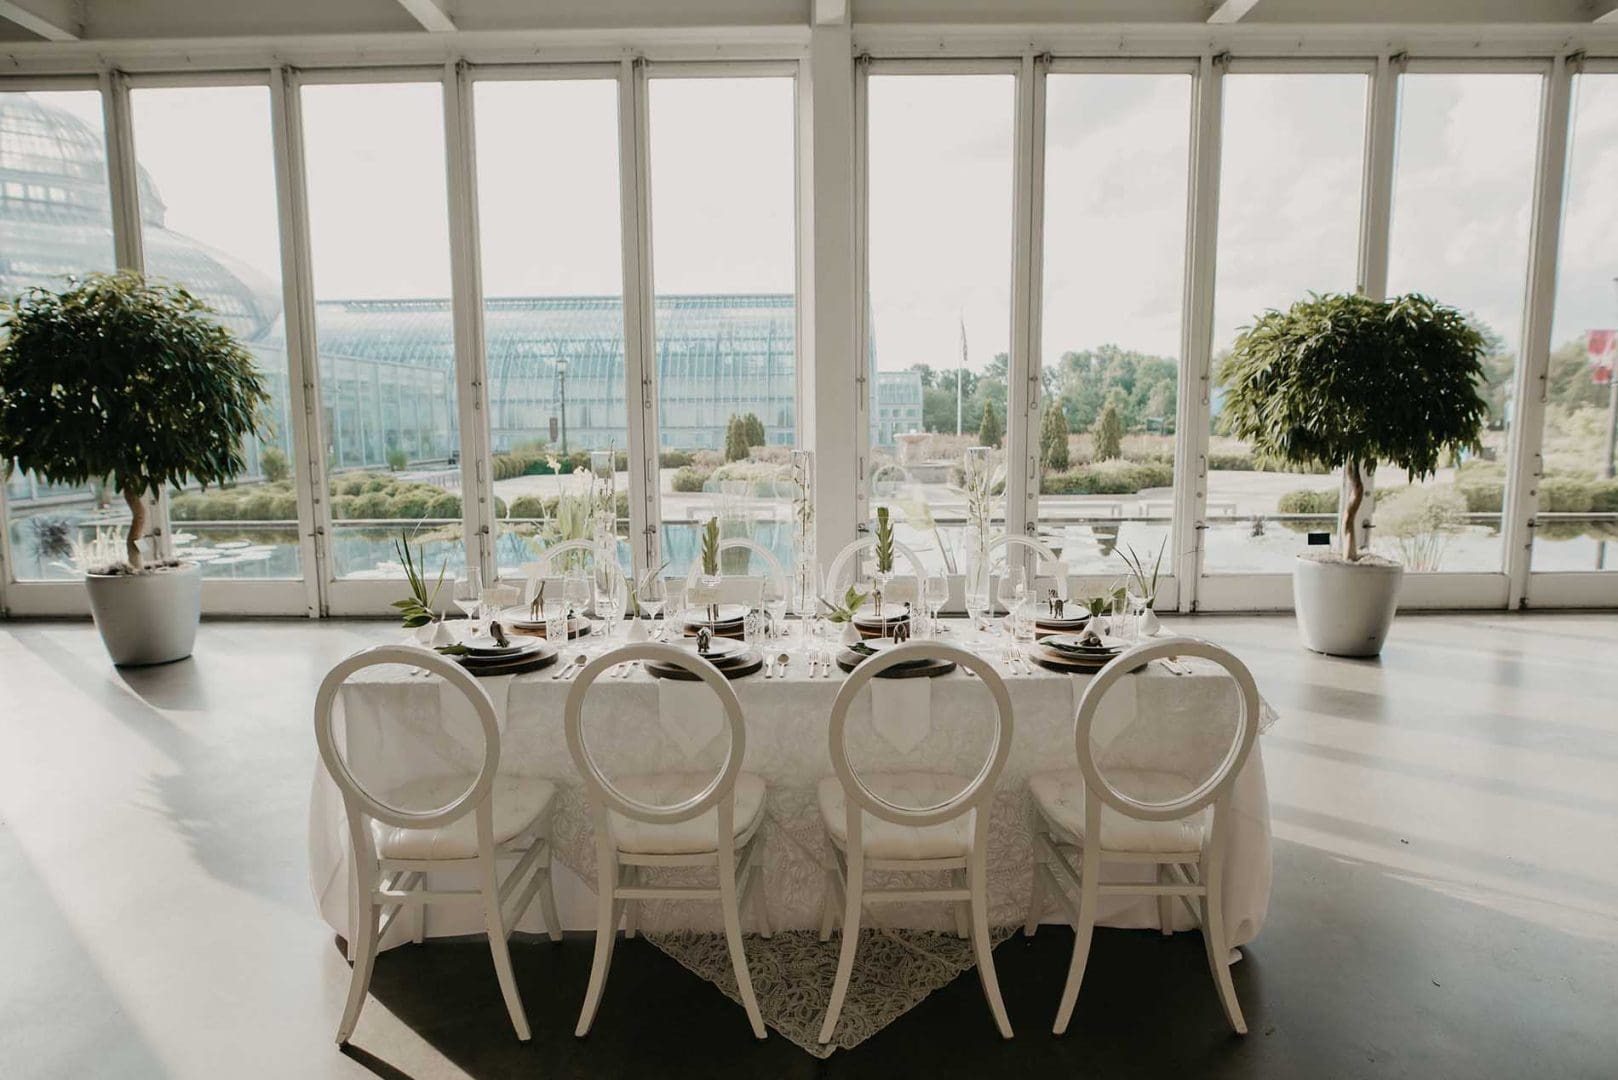 Grooms table overlooking windows of conservatory